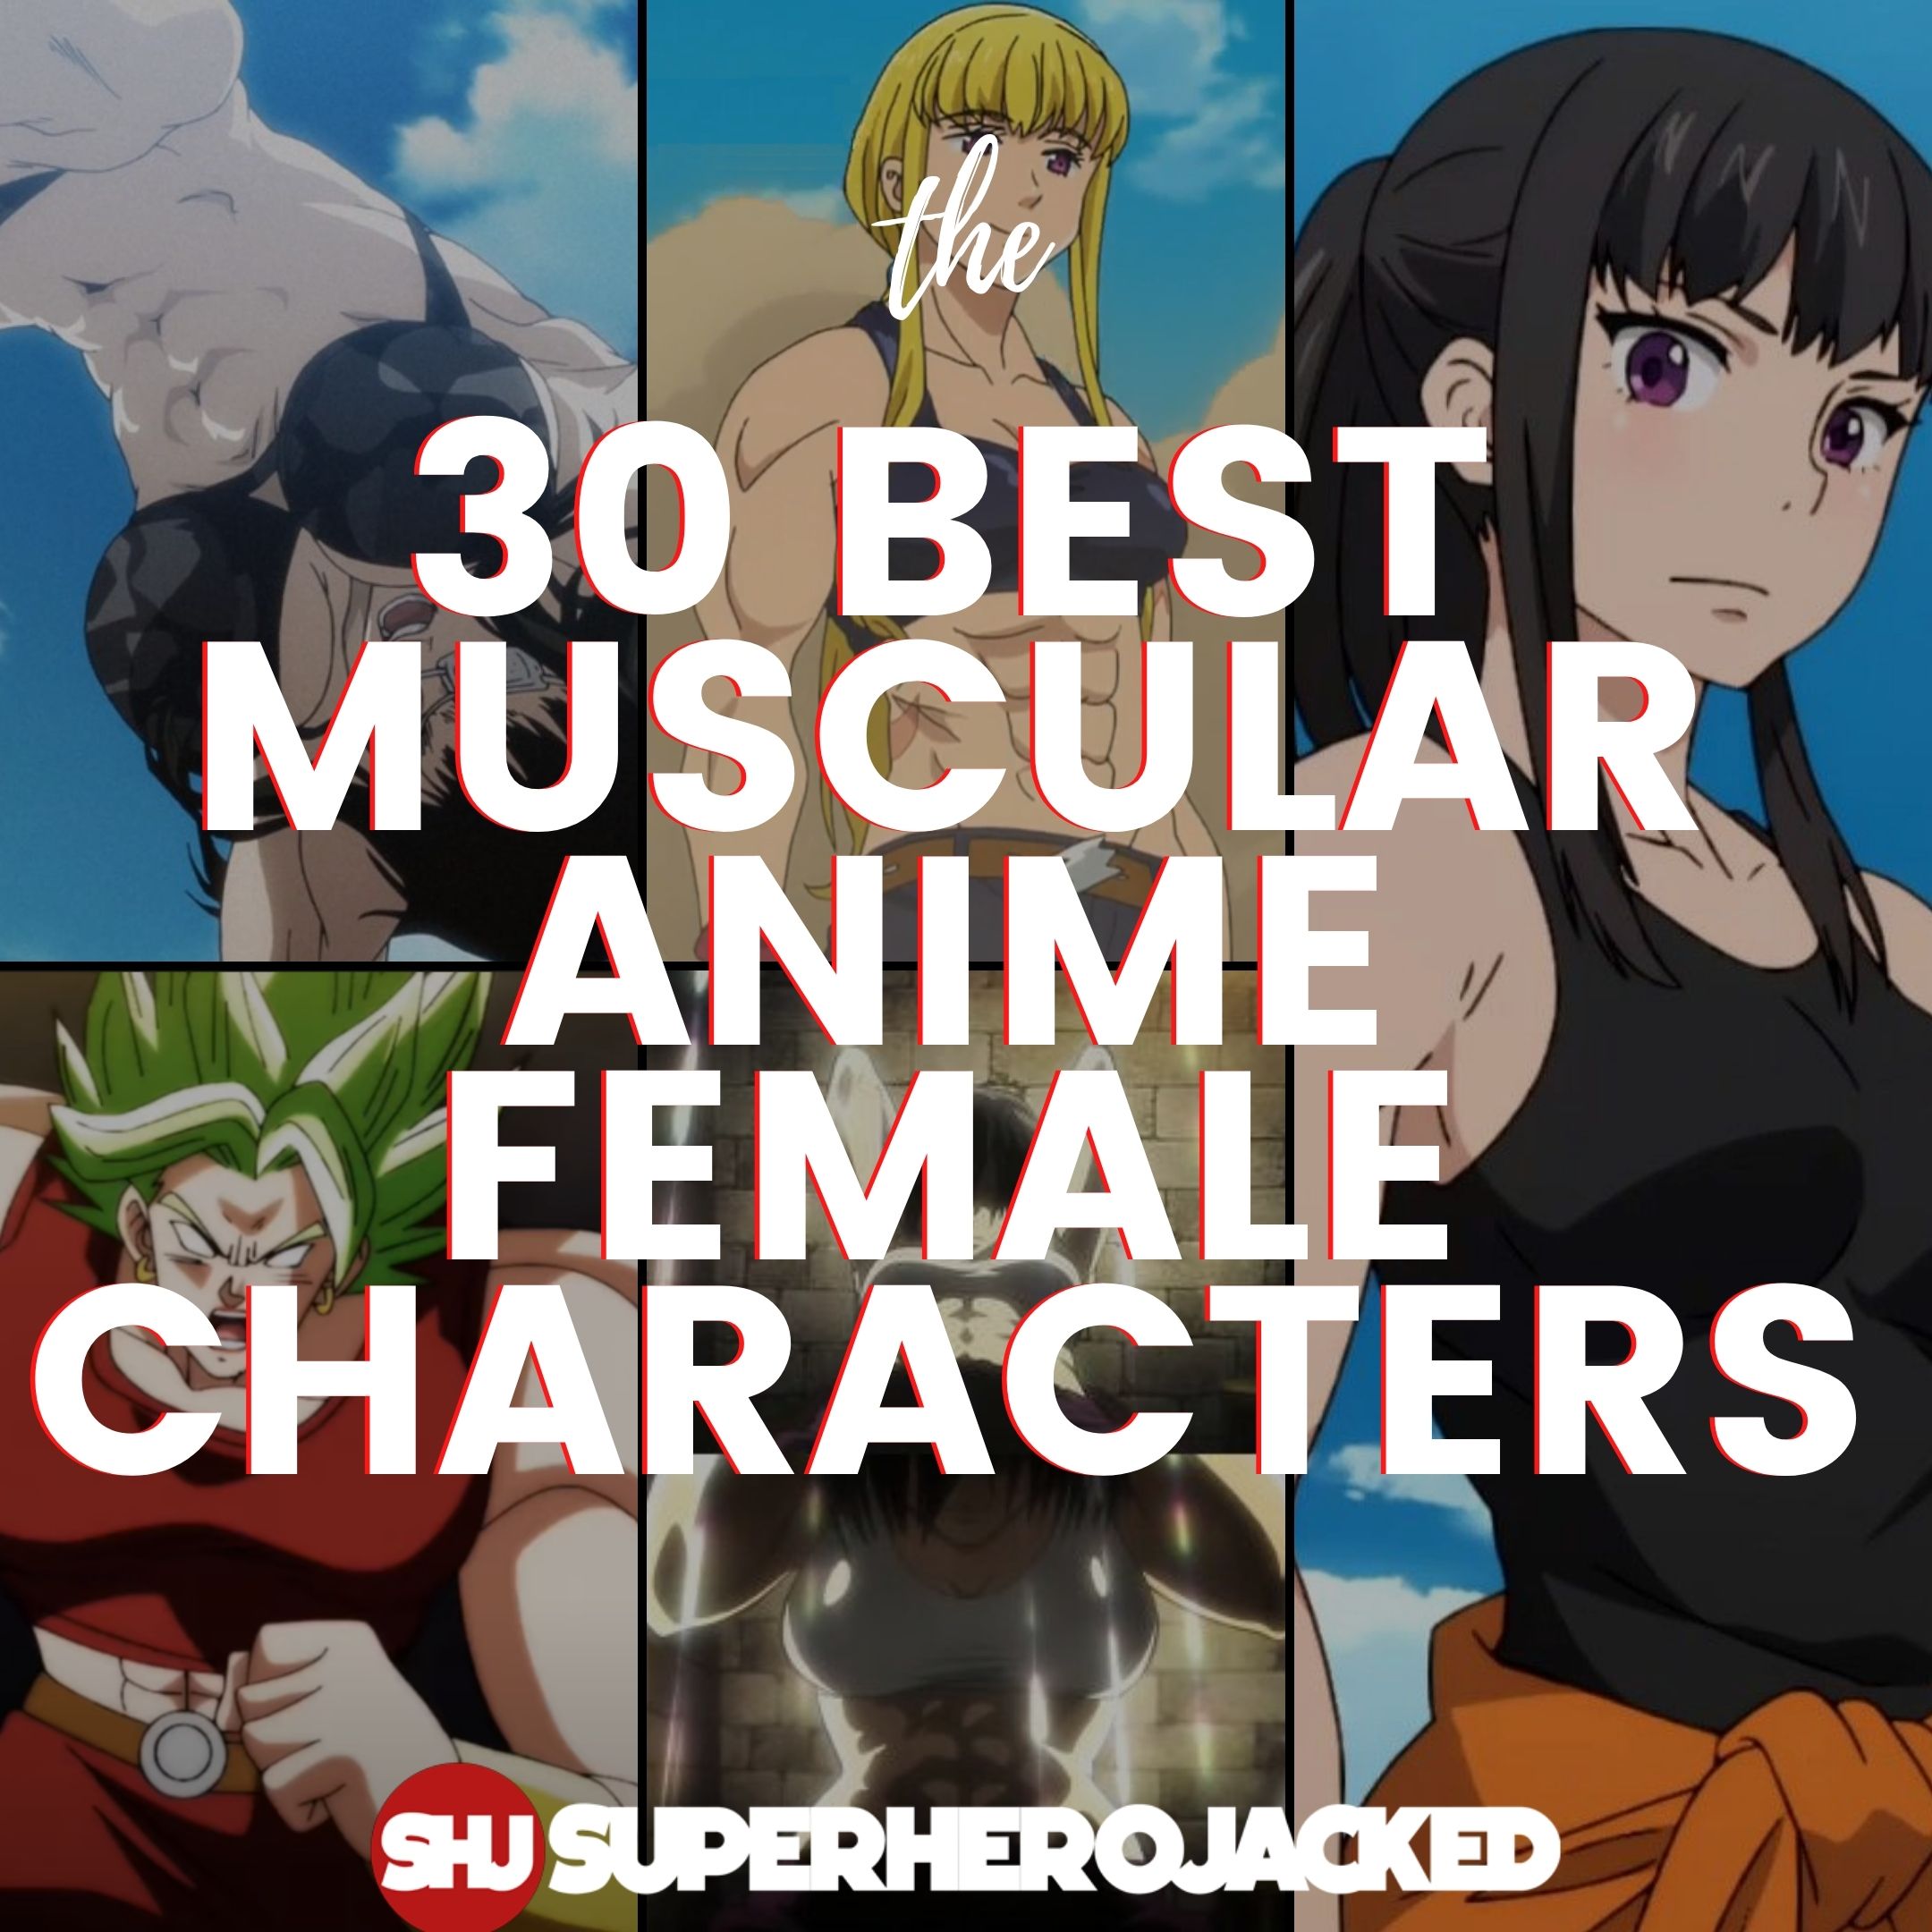 The 10 Best Shonen Anime With A Female Protagonist, According To MyAnimeList